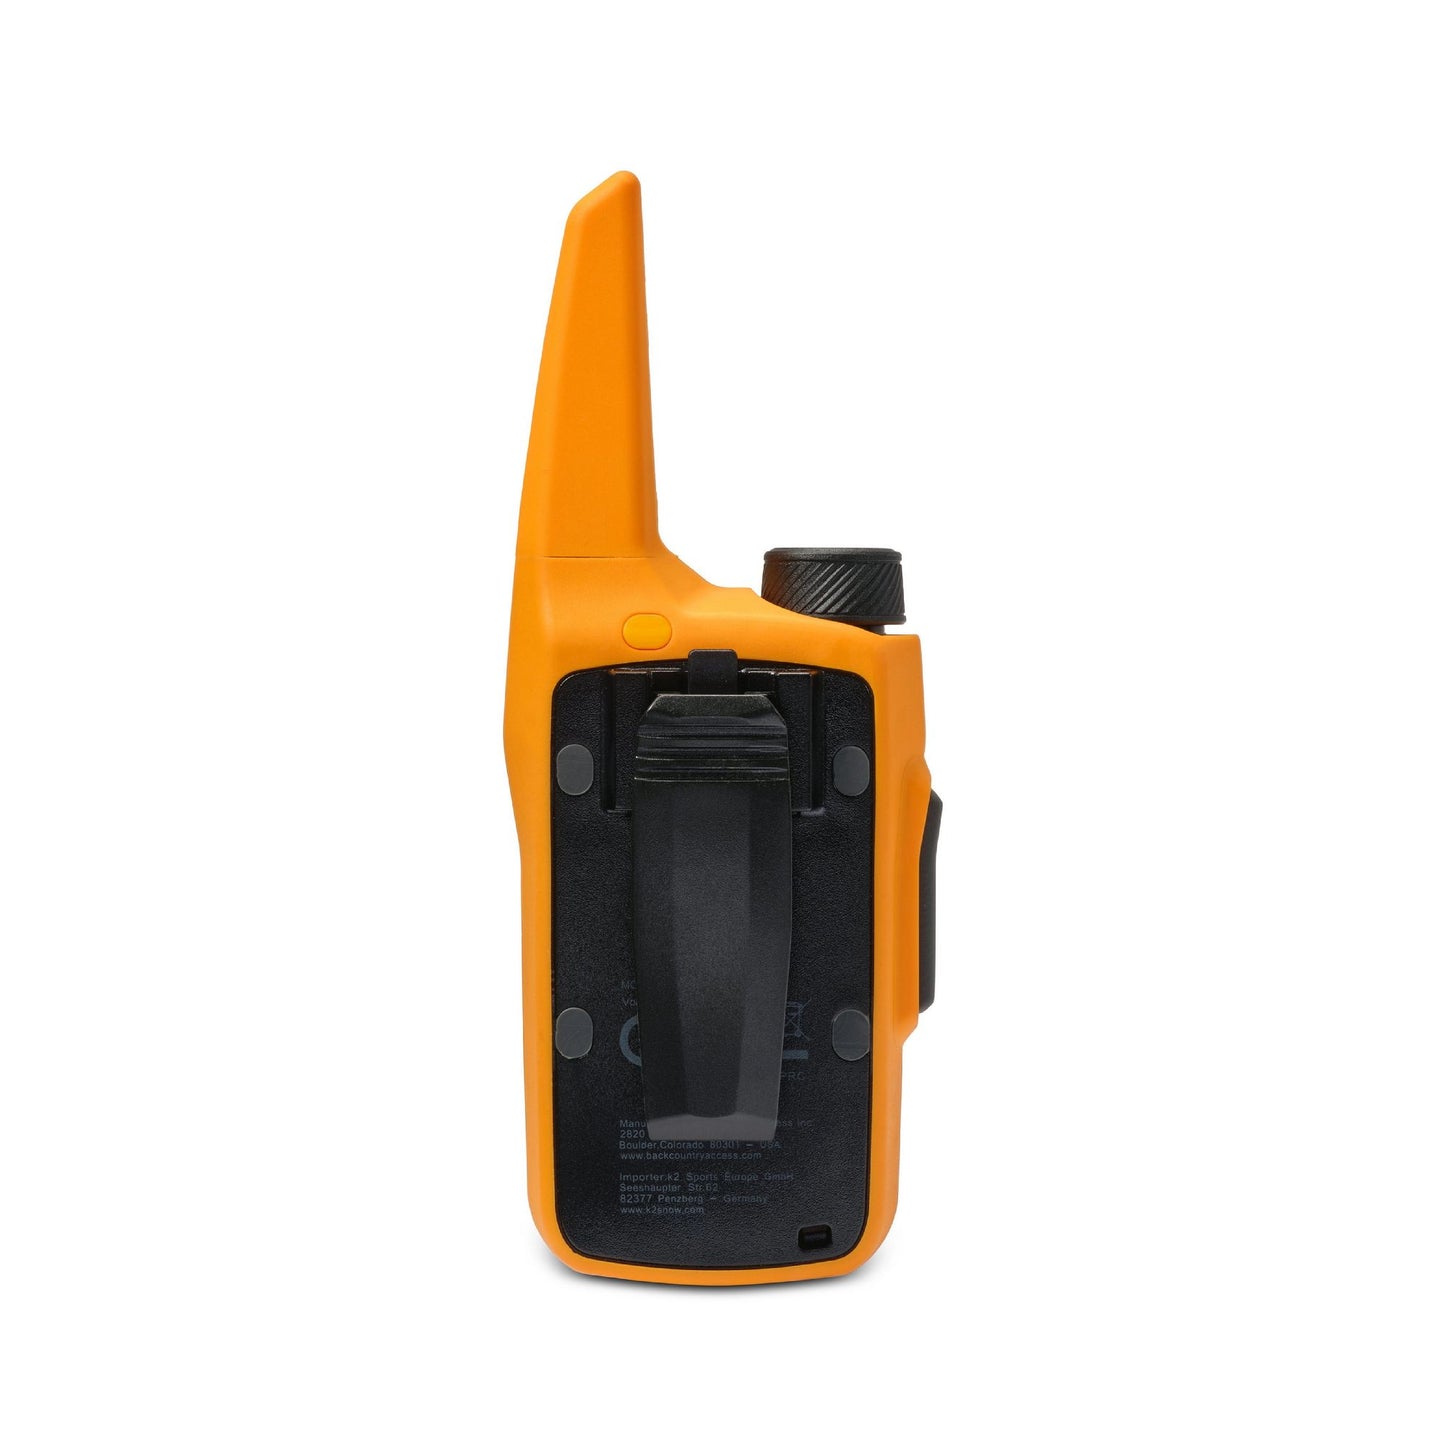 BCA BC Link Mini One Color OS Two-Way Radios